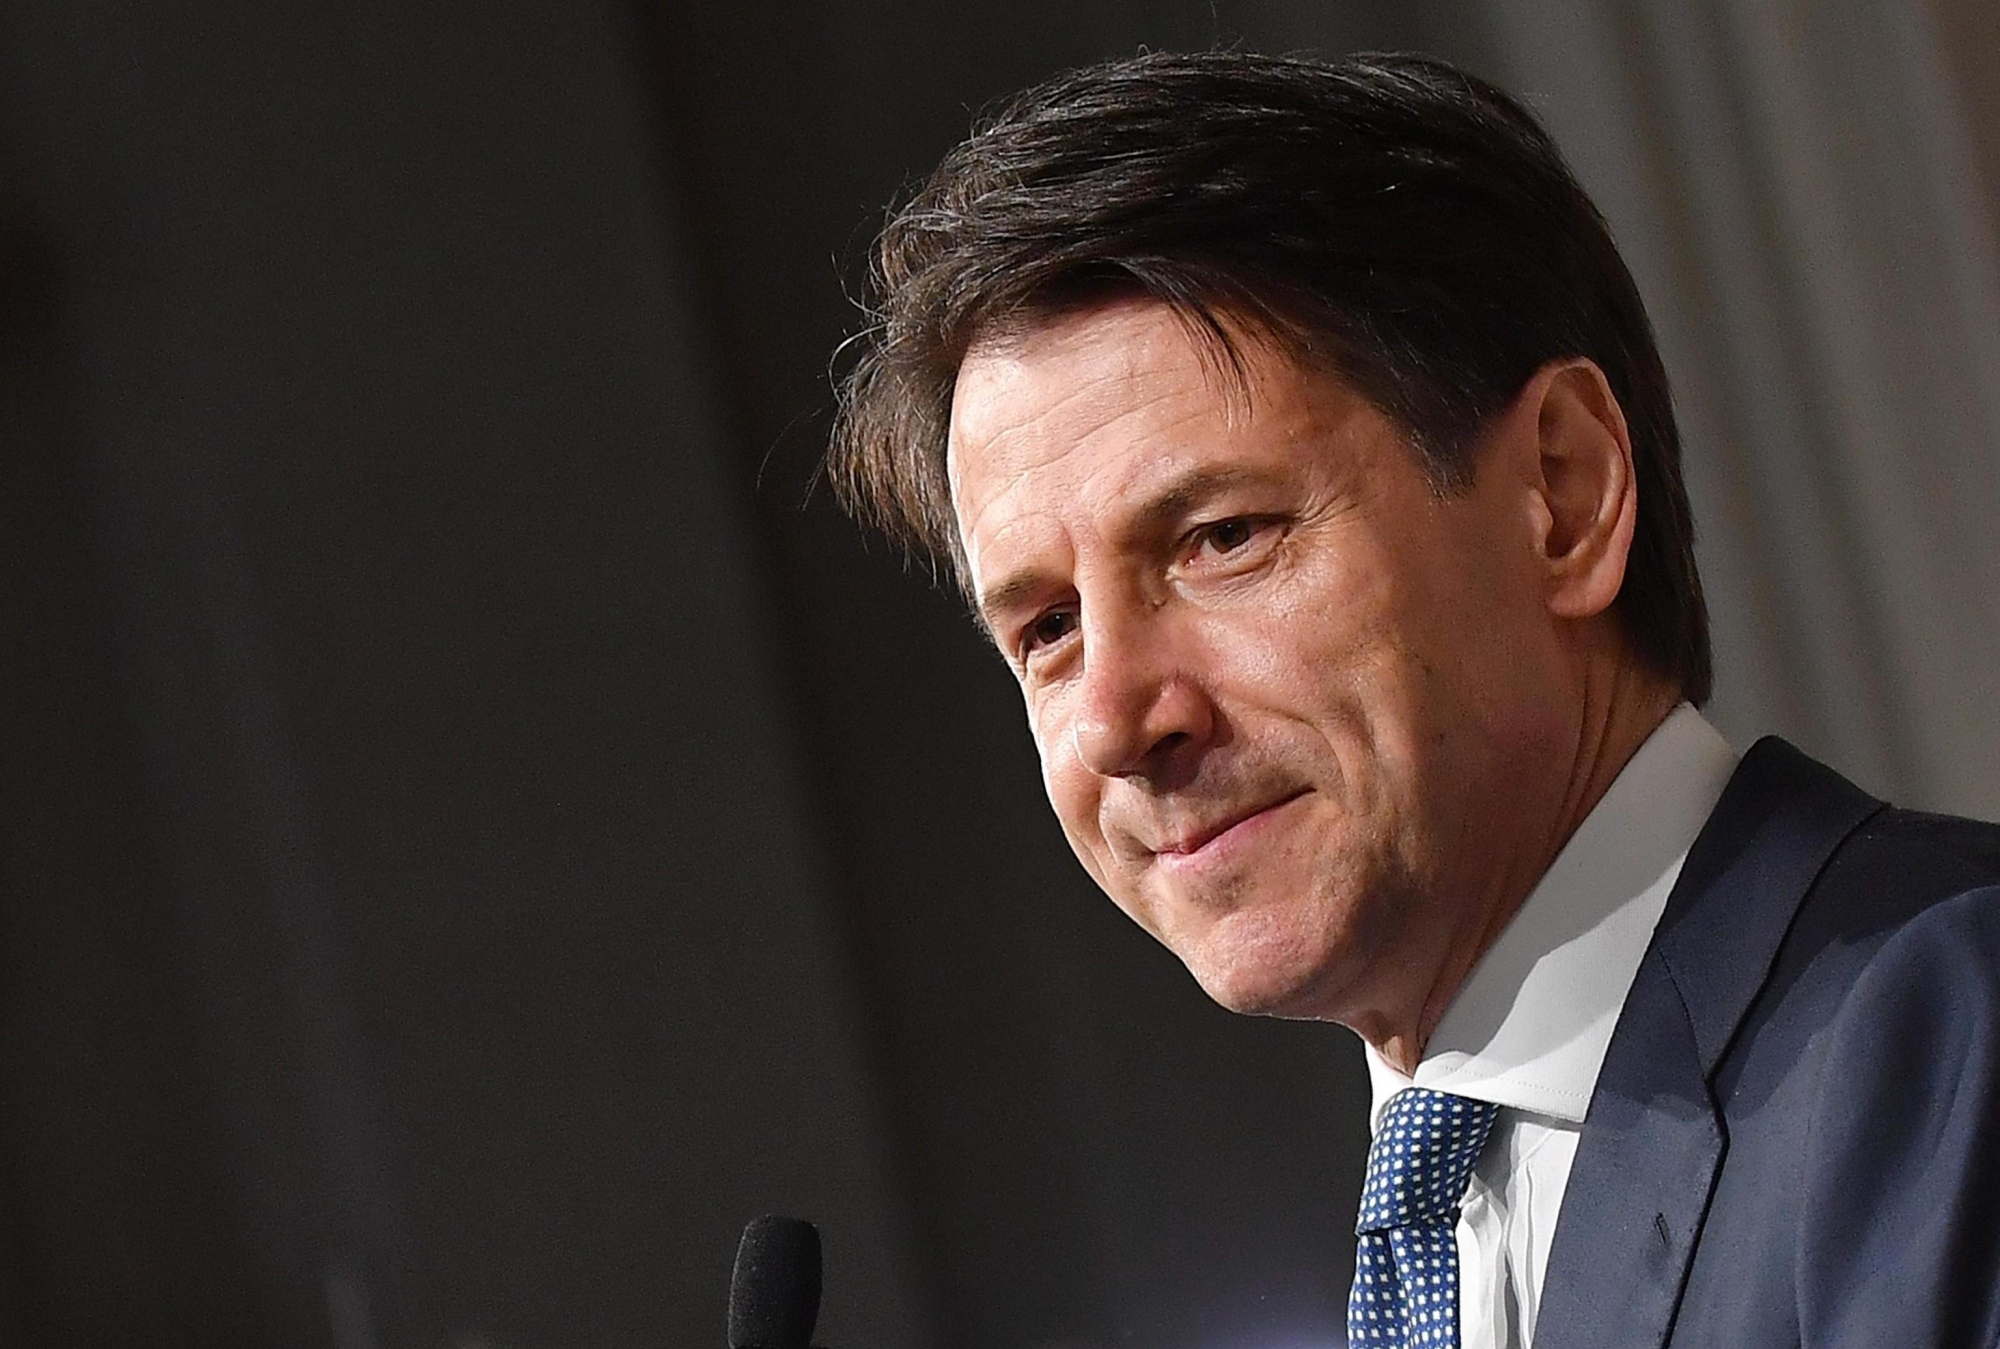 epa06758302 Designated Italian Prime Minister Giuseppe Conte (2-R) addresses the media after a meeting with Italian President Sergio Mattarella at the Quirinal Palace in Rome, Italy, 23 May 2018. Conte has been given the mandate to become prime minister by President Mattarella, to head the coalition of the two populist parties 5-Star Movement (M5S) and League (Lega).  EPA/ETTORE FERRARI ITALY GOVERNMENT